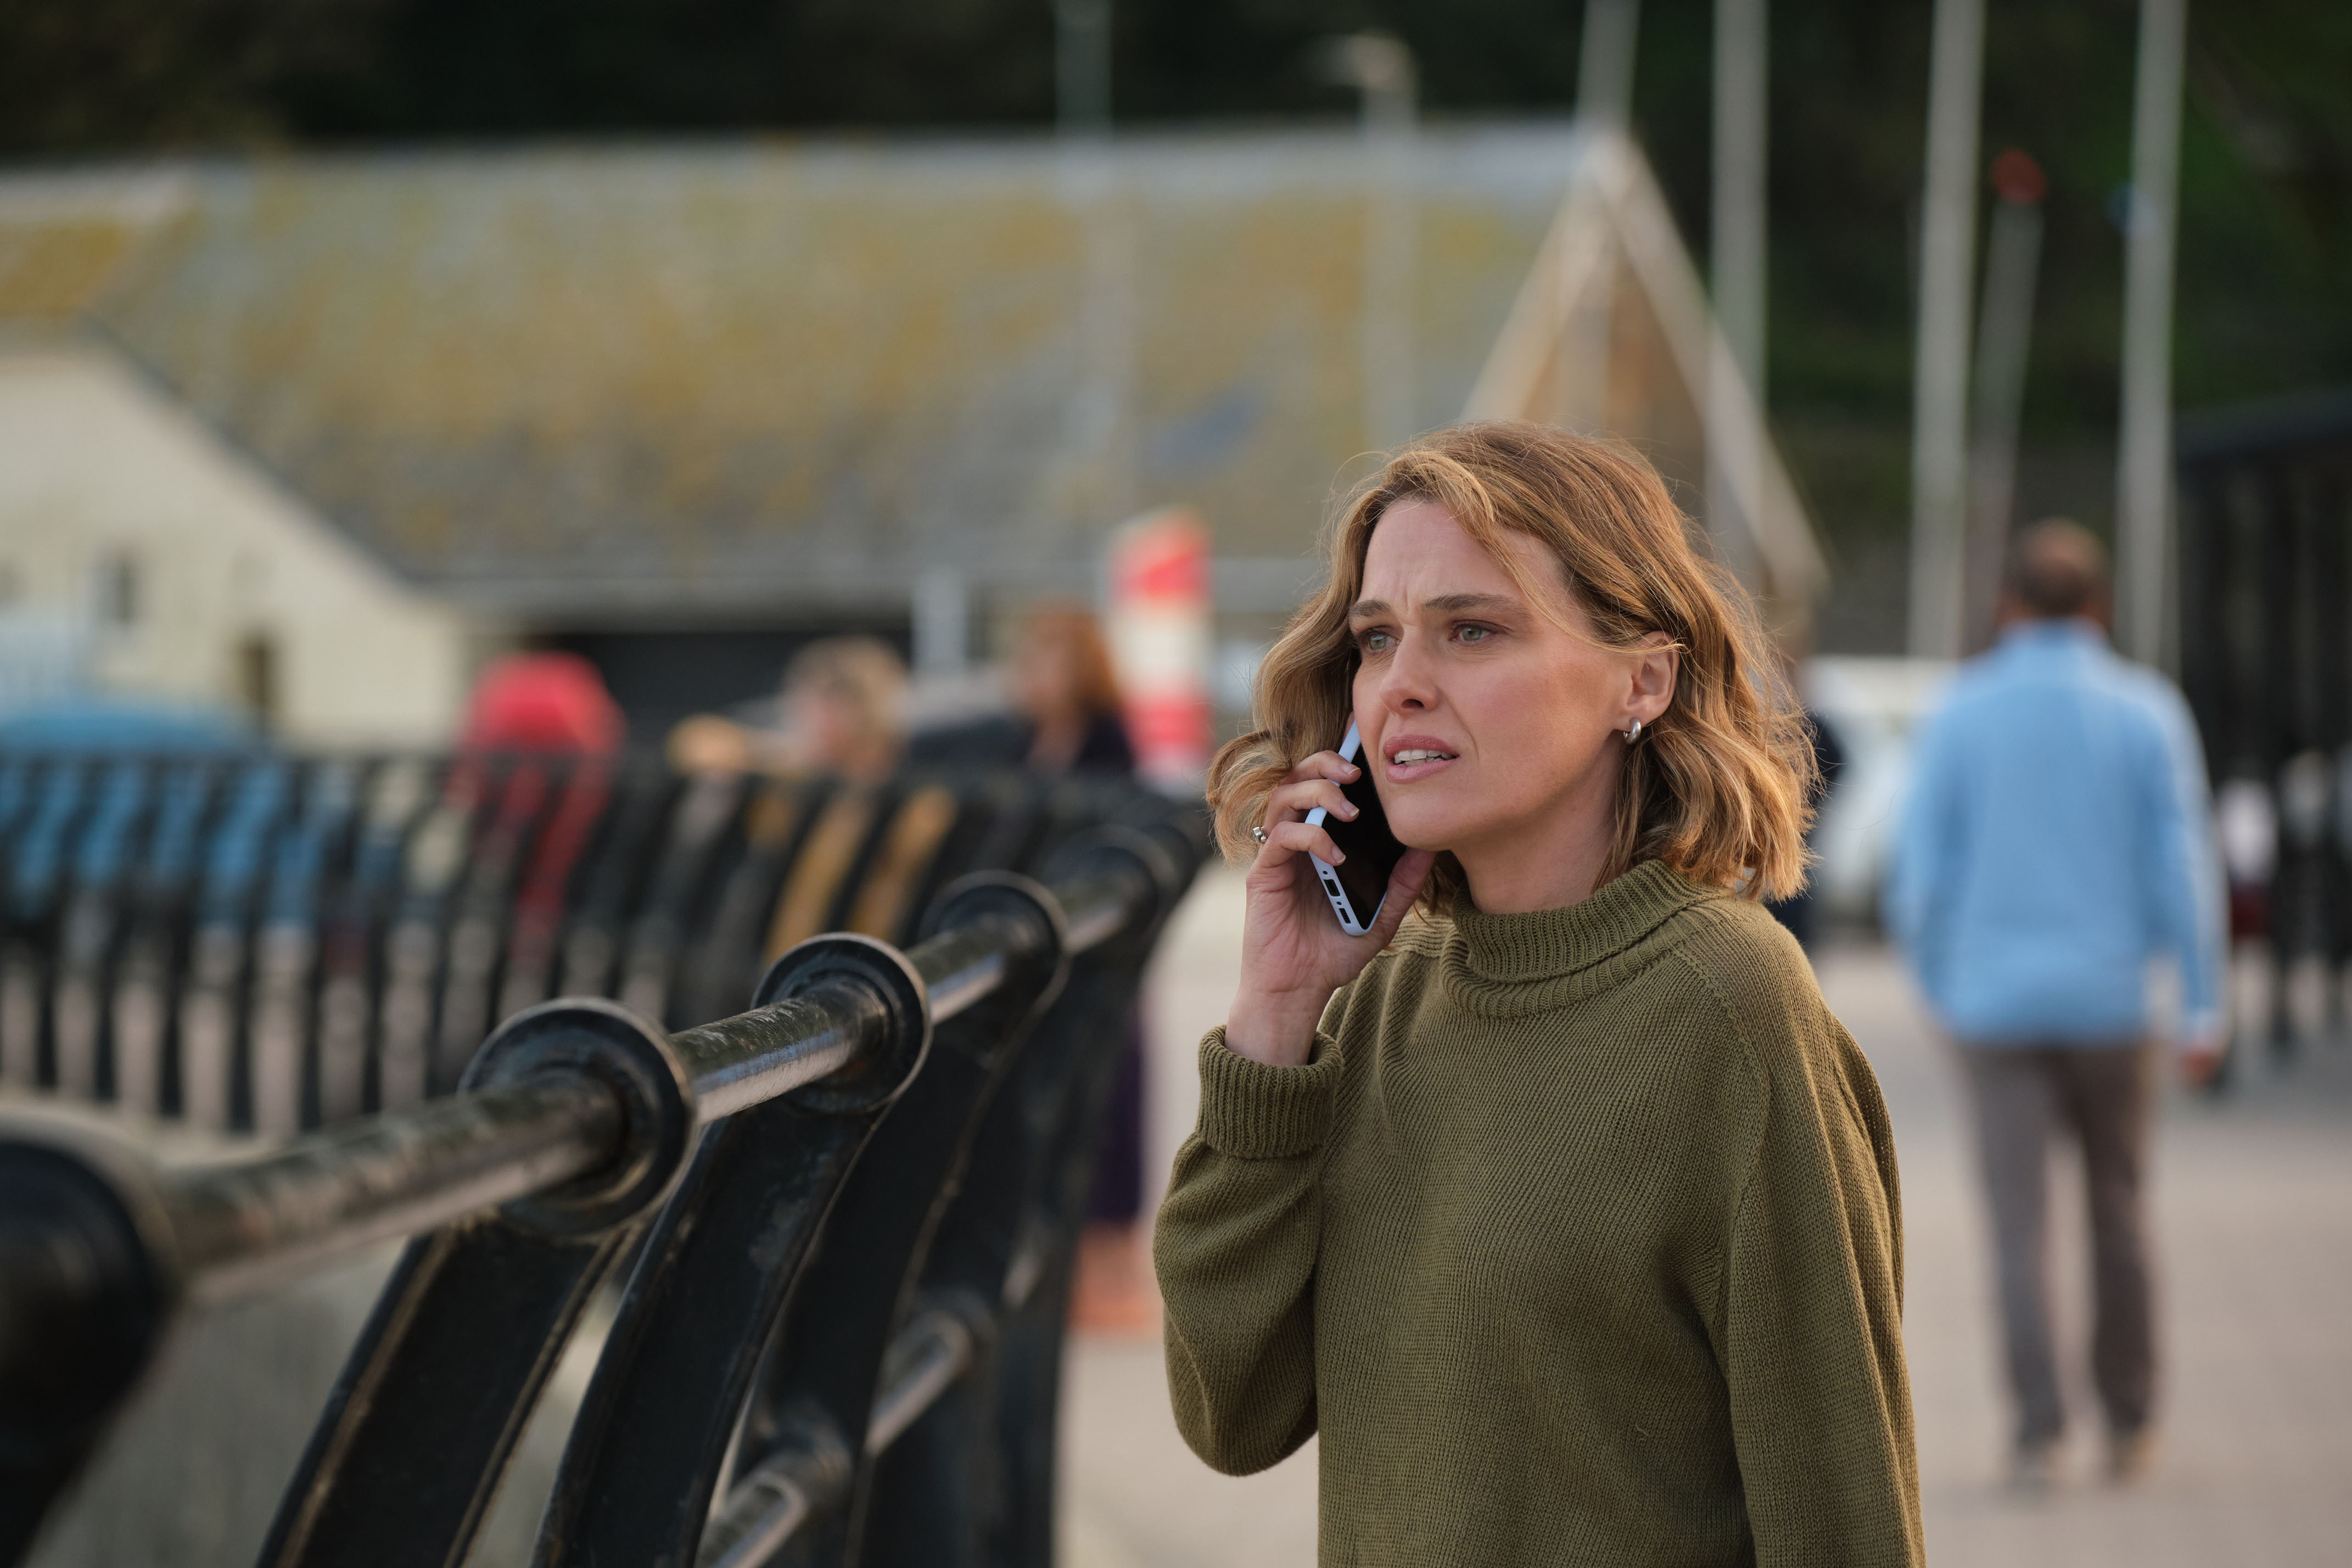 Martha (Sally Bretton) stands on the seafront, making a call on her mobile phone and looking distressed